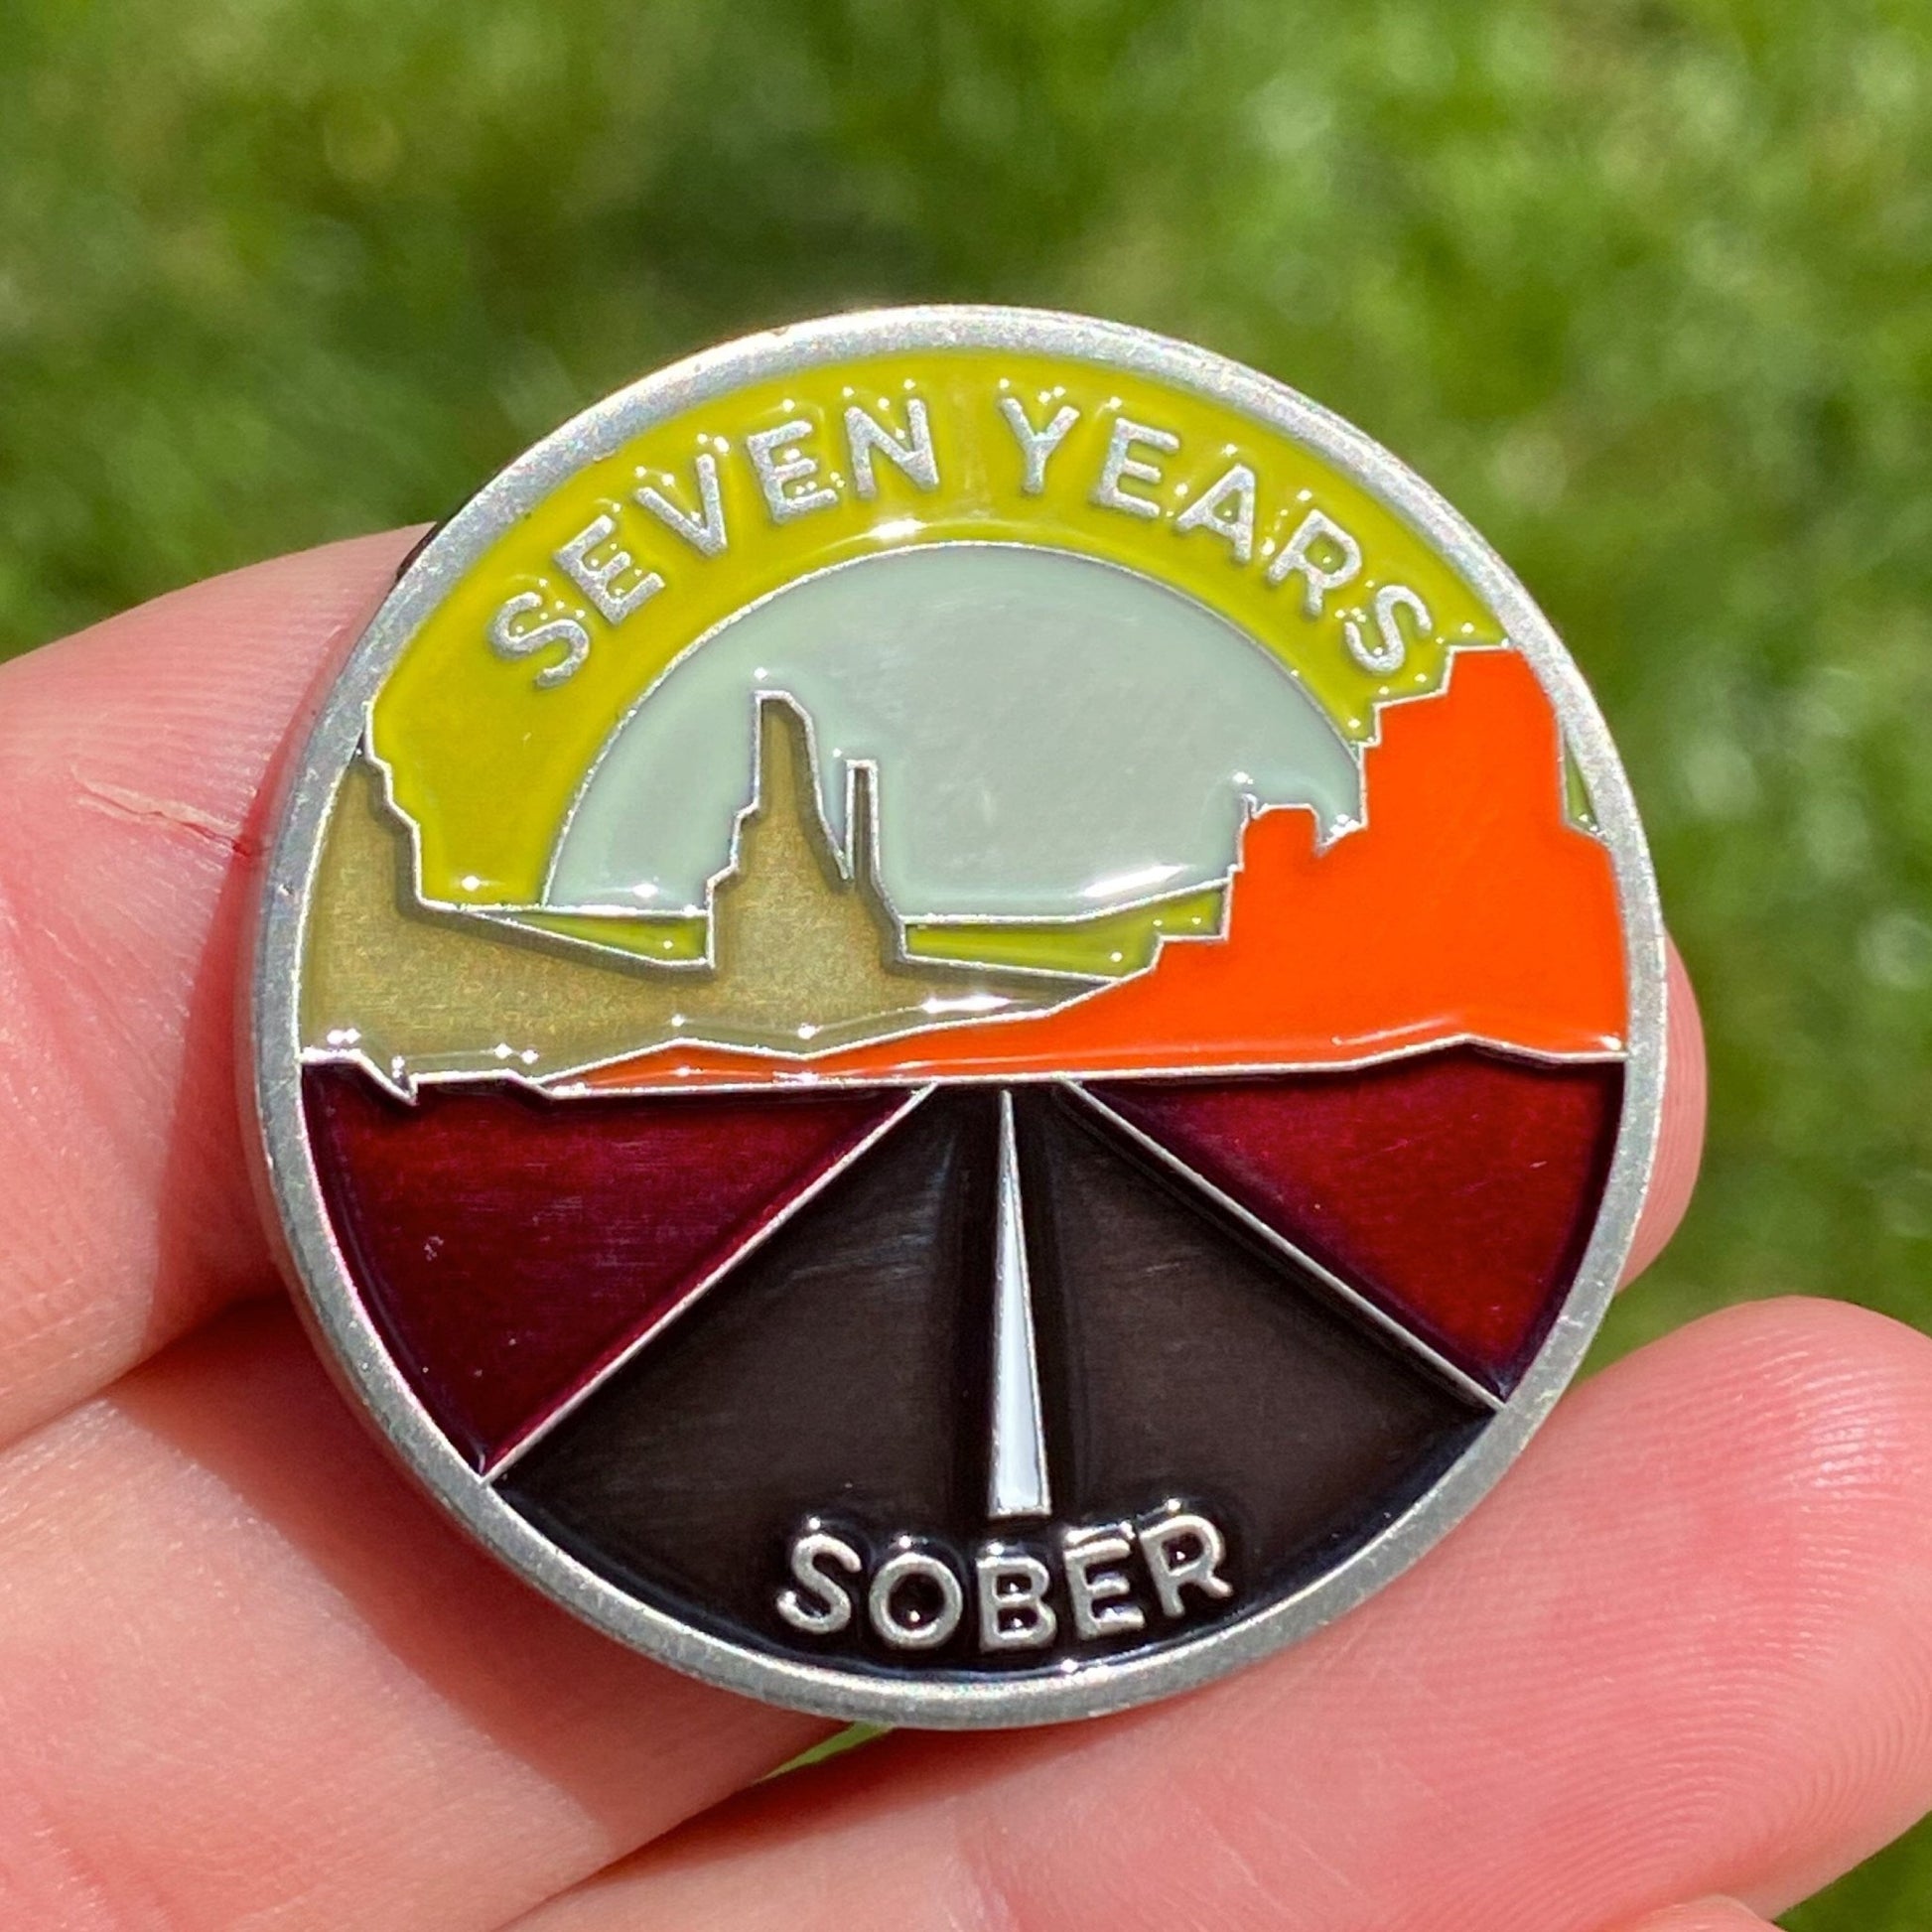 Seven Years Sober sobriety coin - The Achieve Mint